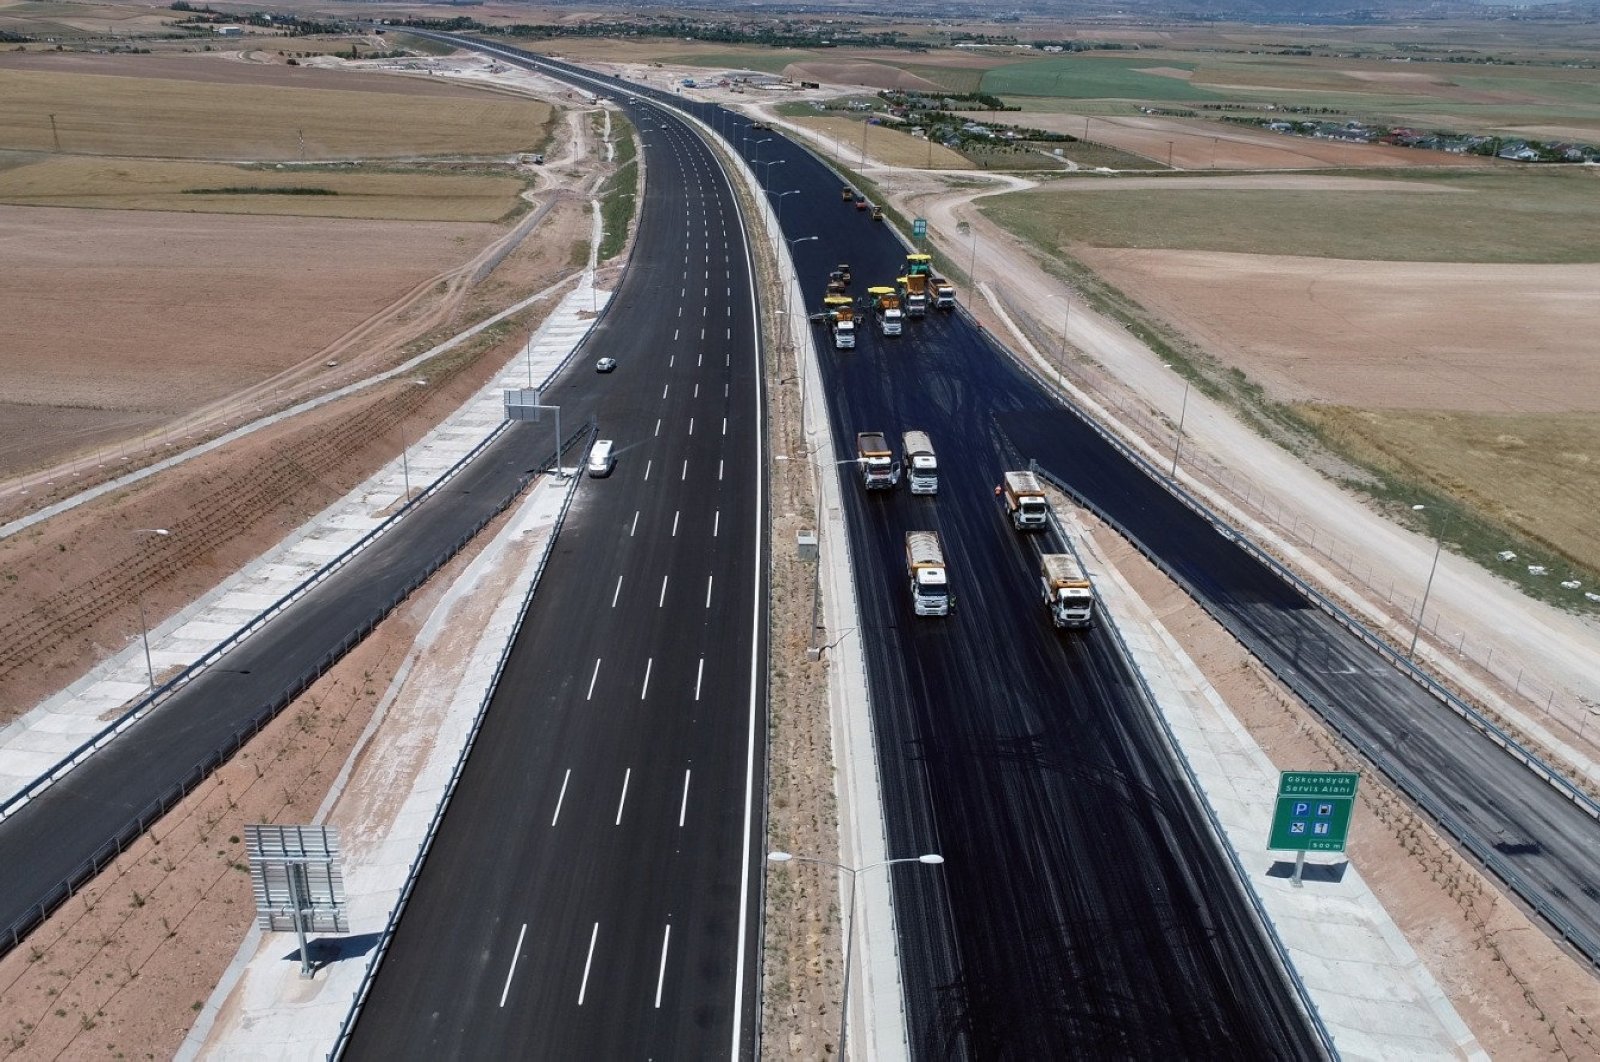 Trucks are seen on the highway that connects the capital Ankara and the central province of Niğde, Turkey, Sept. 4, 2020. (DHA Photo)